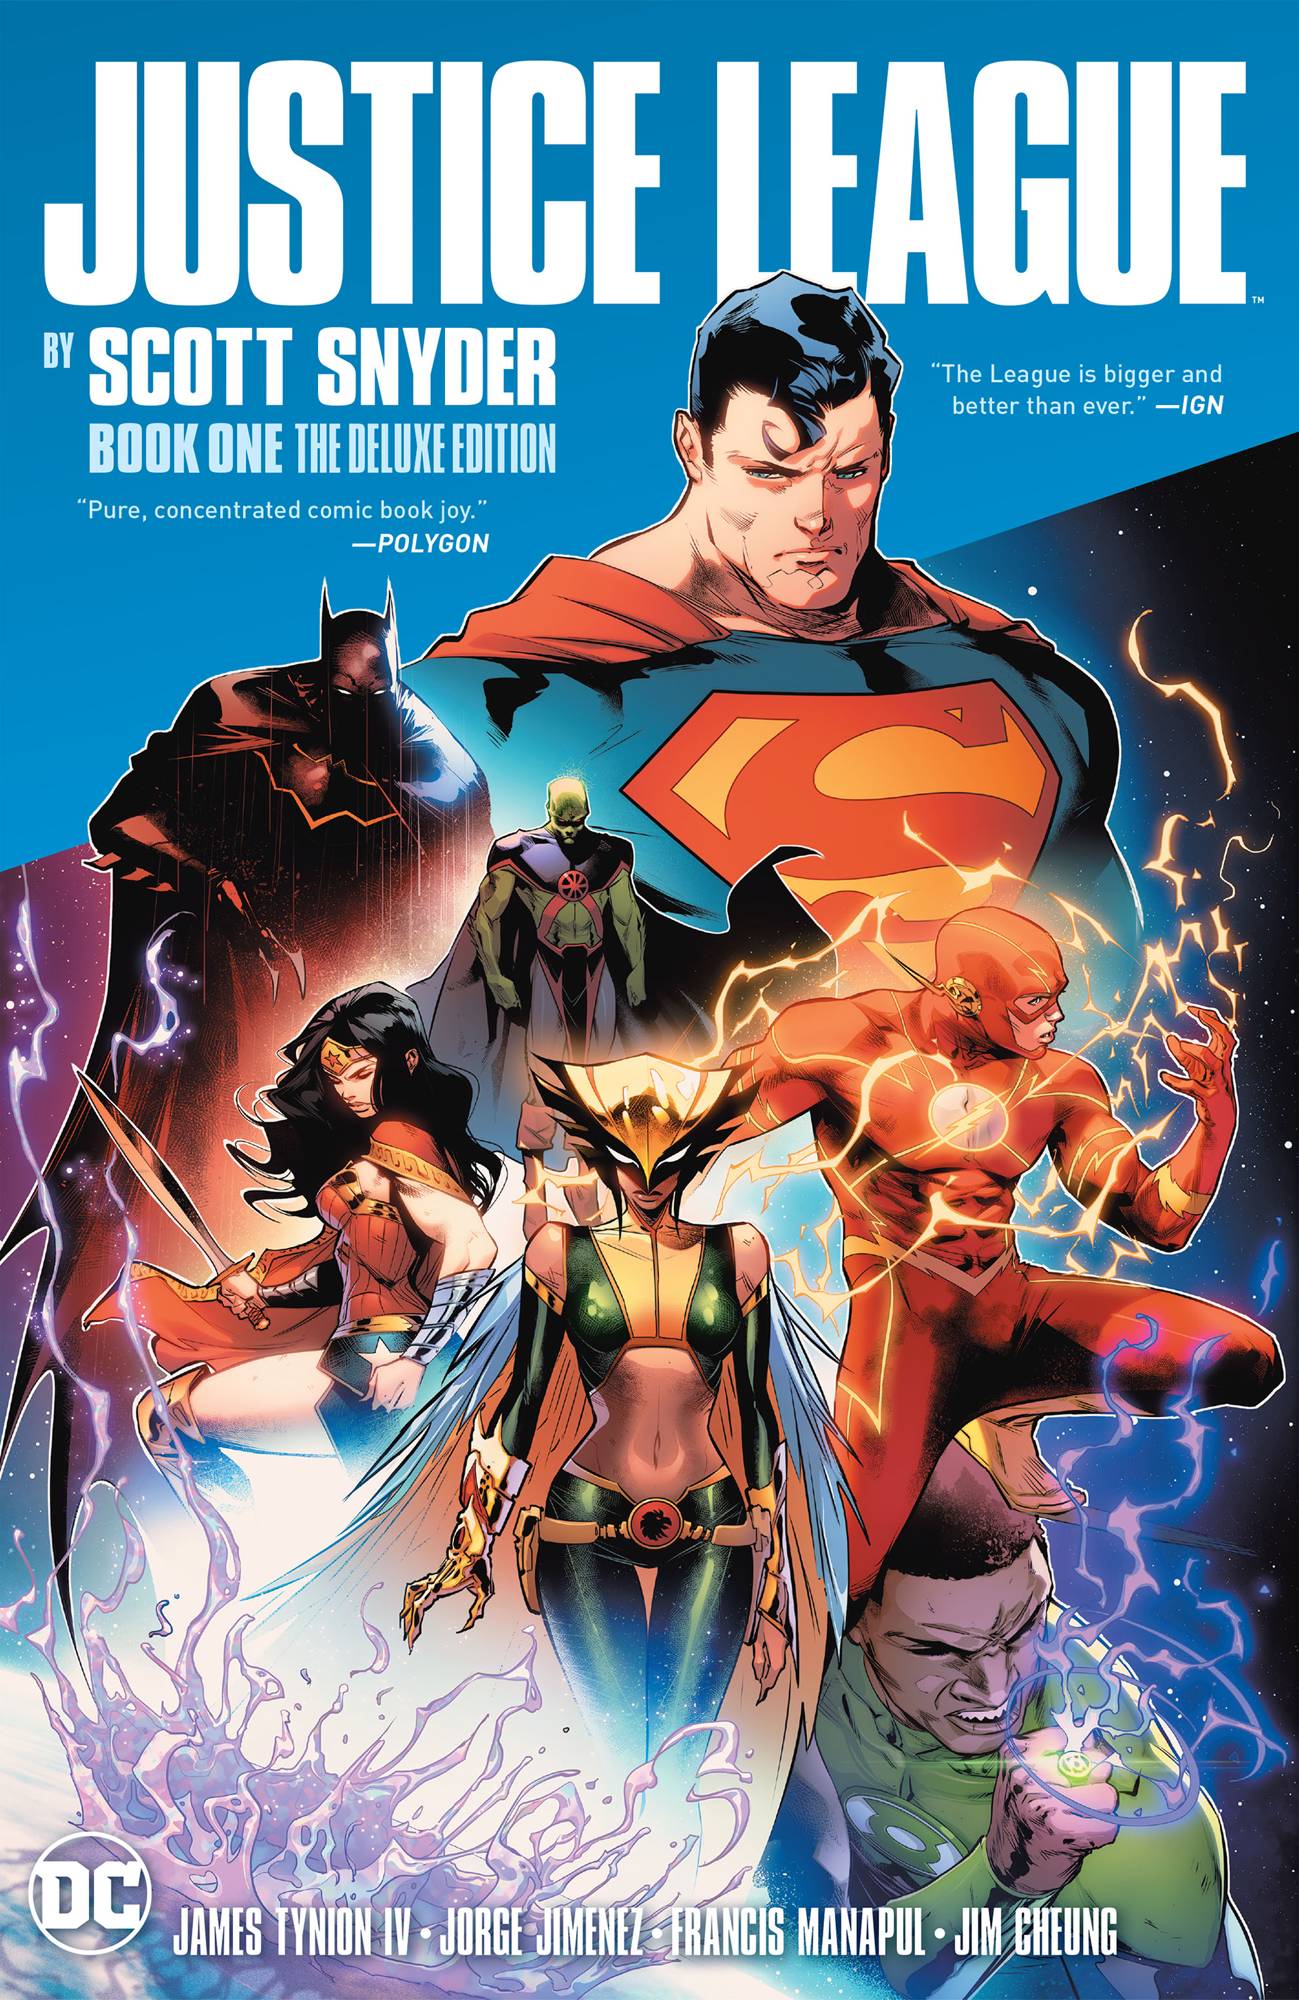 Justice League by Scott Snyder Deluxe Edition Hardcover Book 1